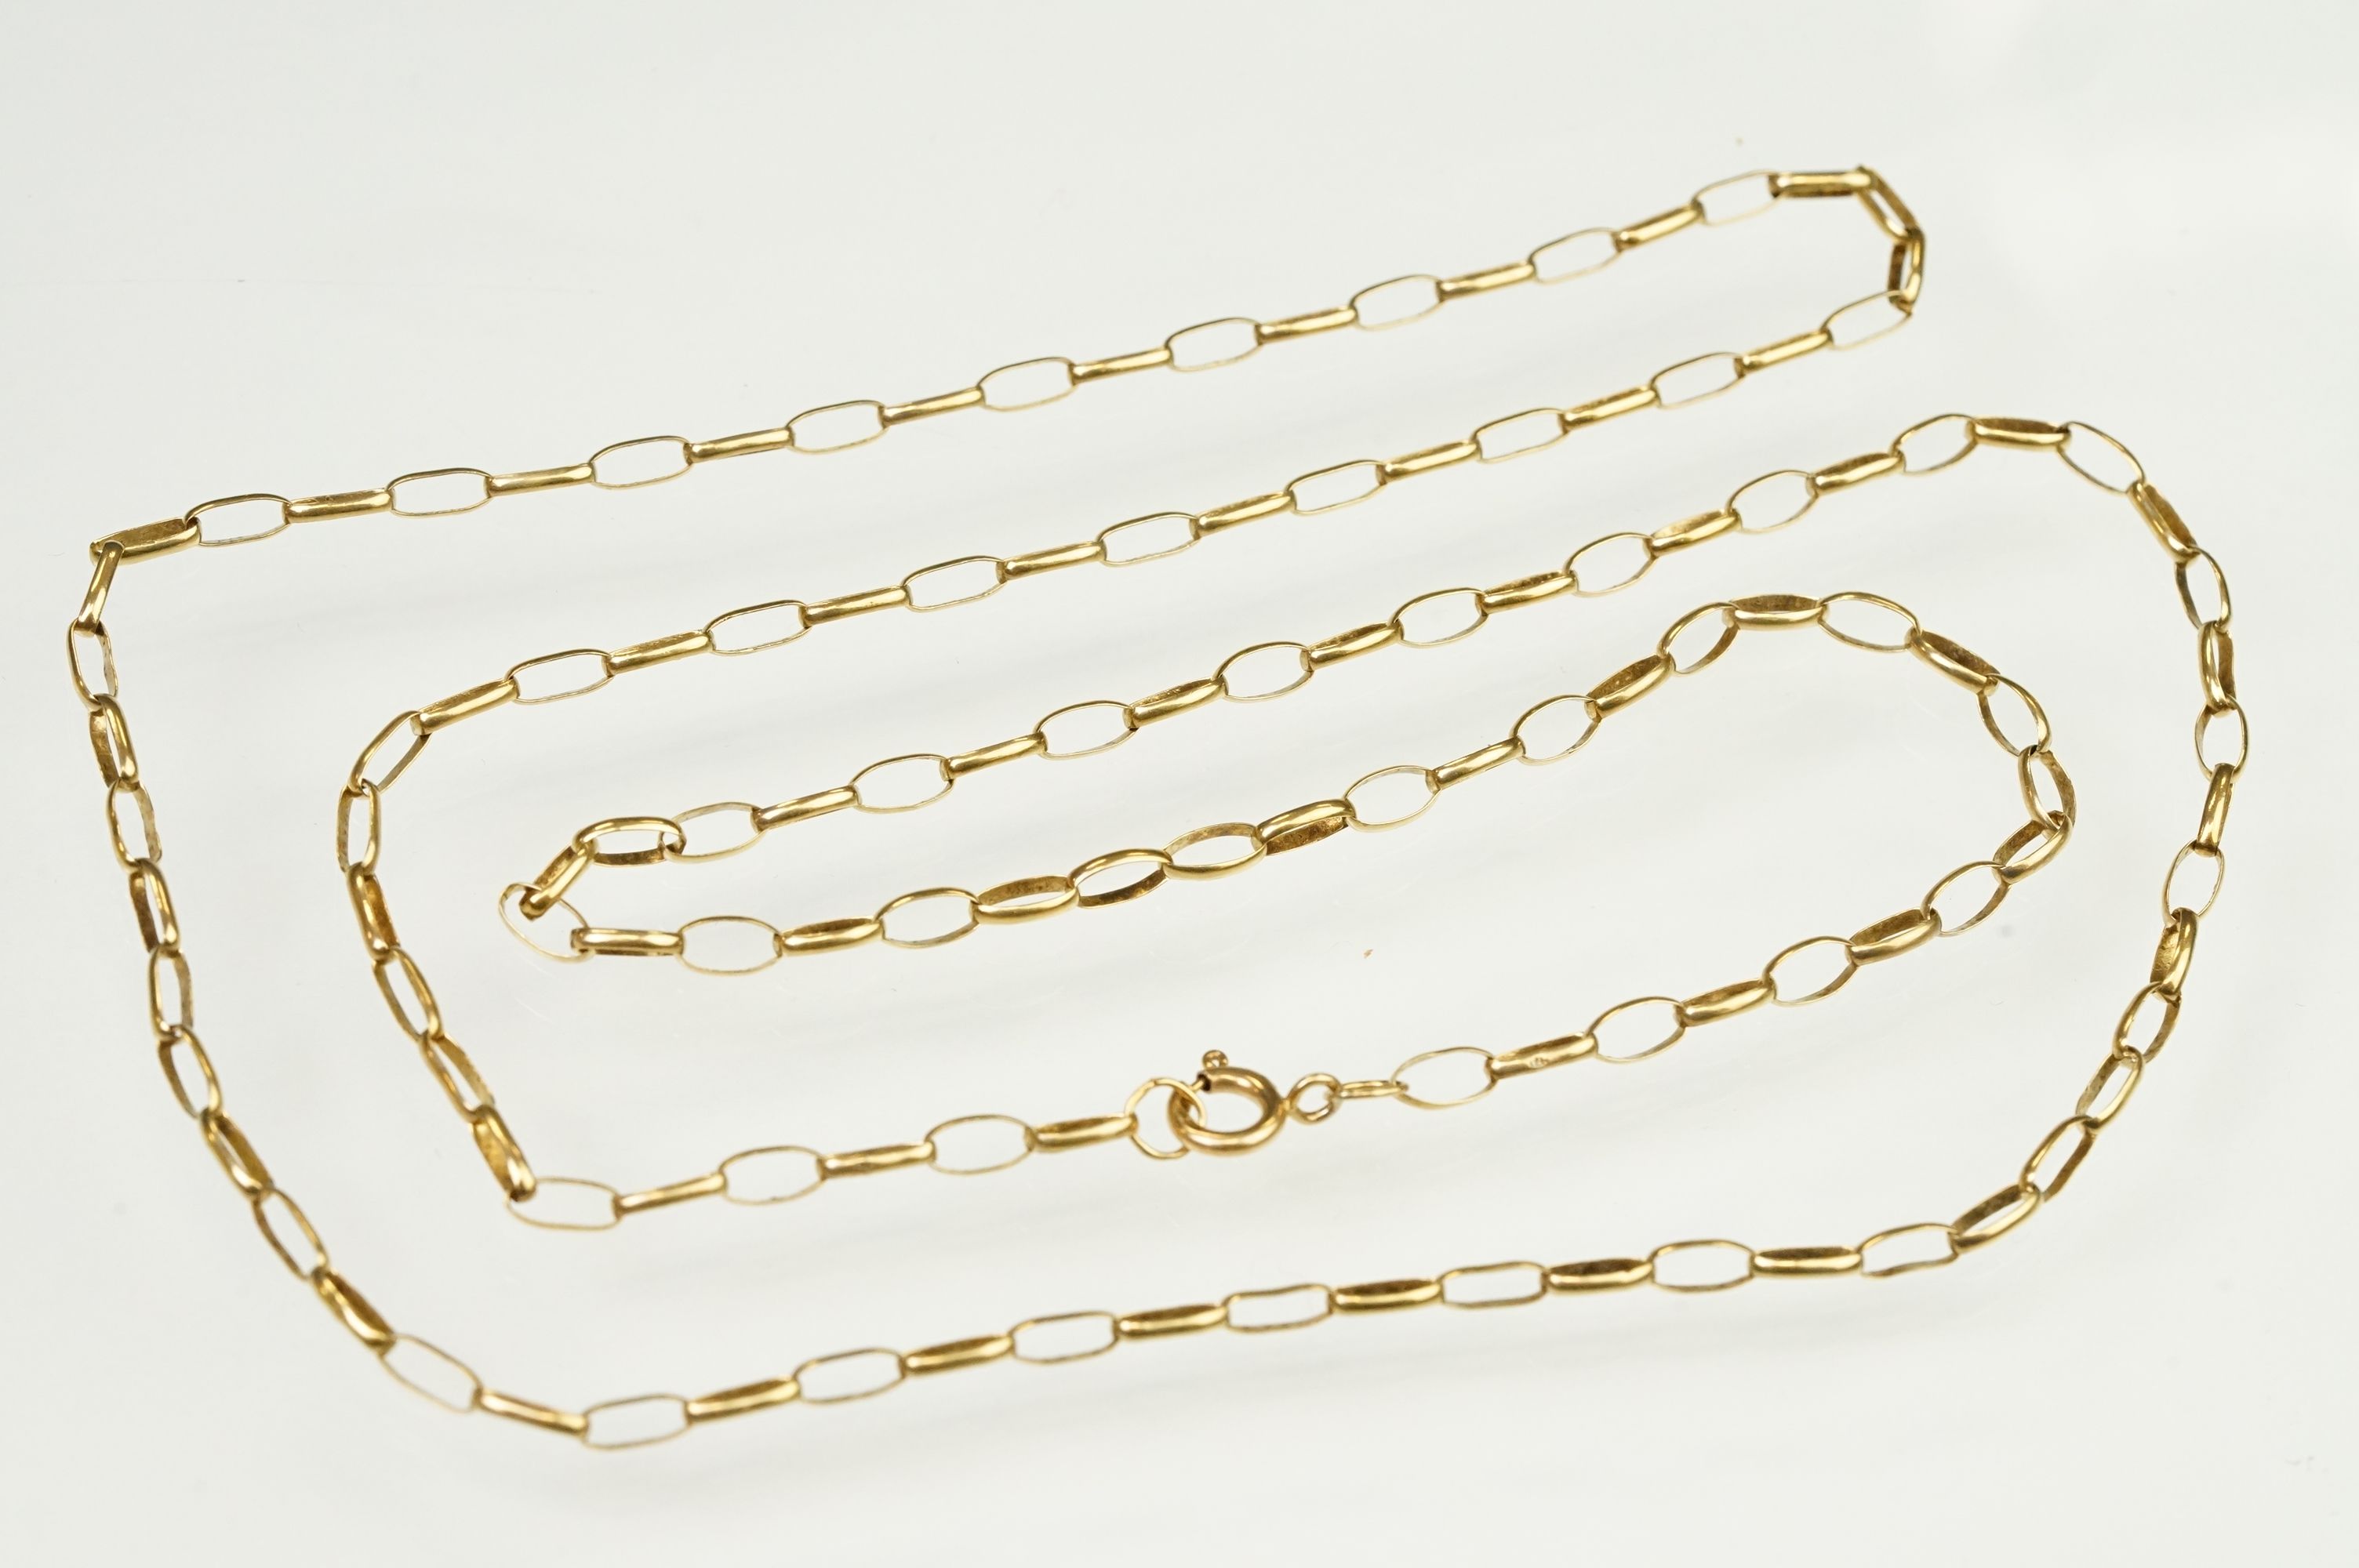 9ct gold oval link necklace chain with spring ring clasp. Marked 9k to clasp. Measures 80cm.